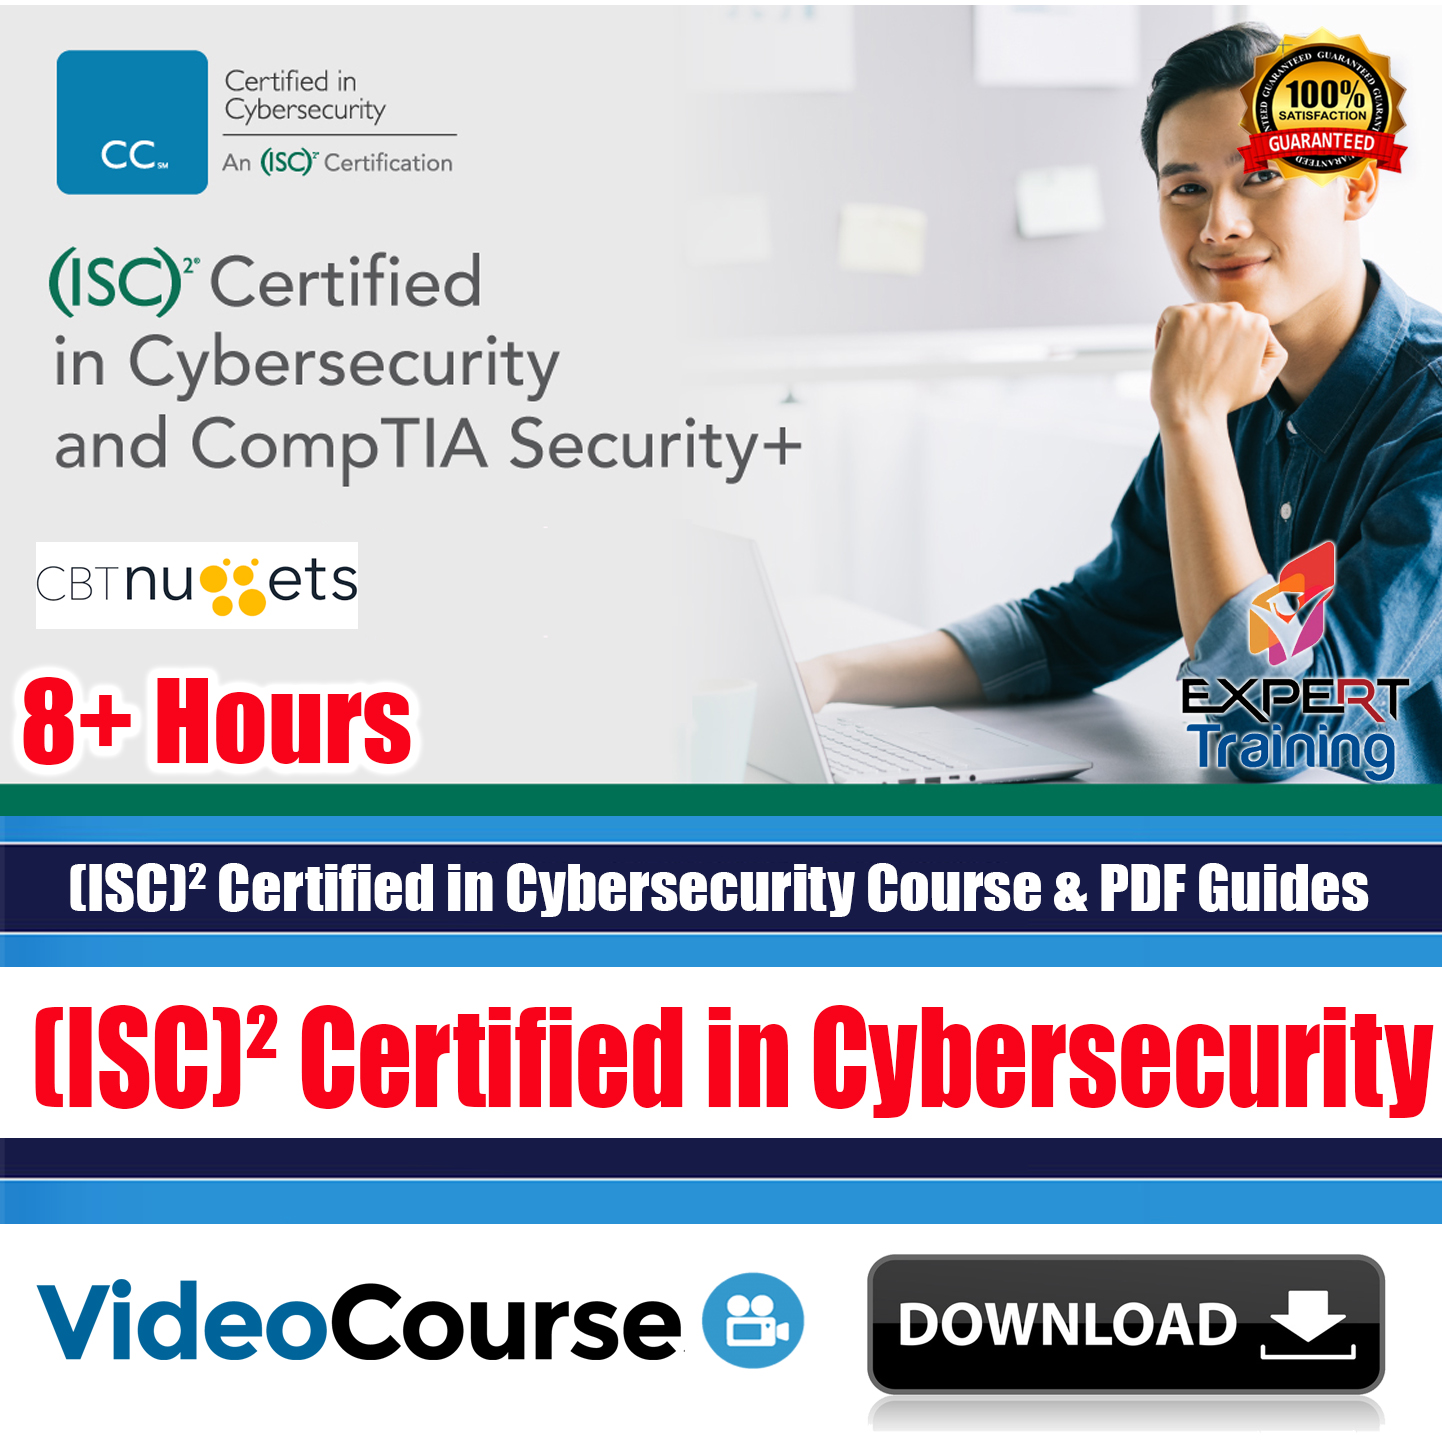 (ISC)² Certified in Cybersecurity (CC) Course & PDF Guides